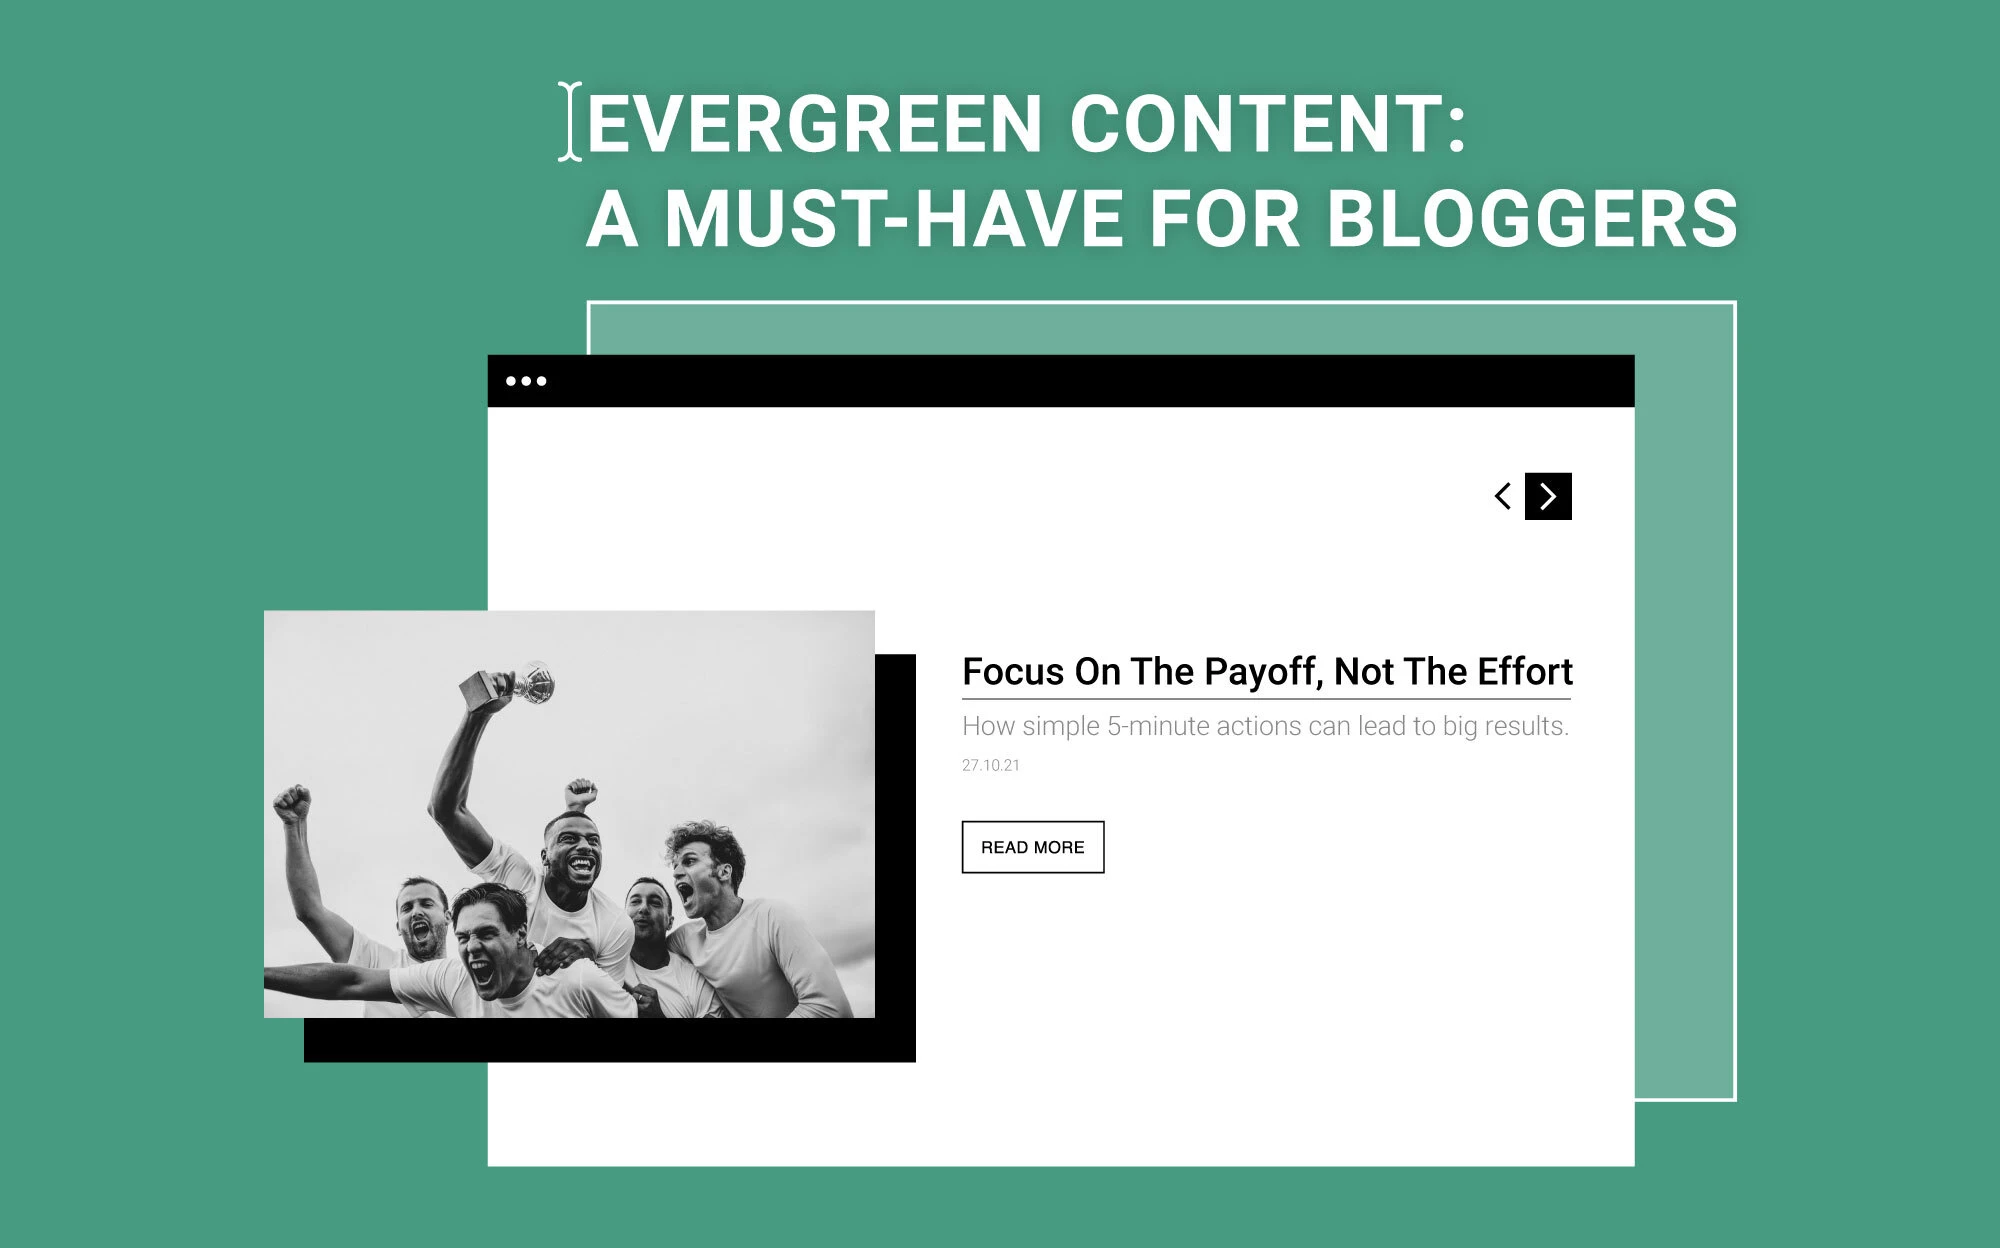  Evergreen Content: A Must-Have for Bloggers